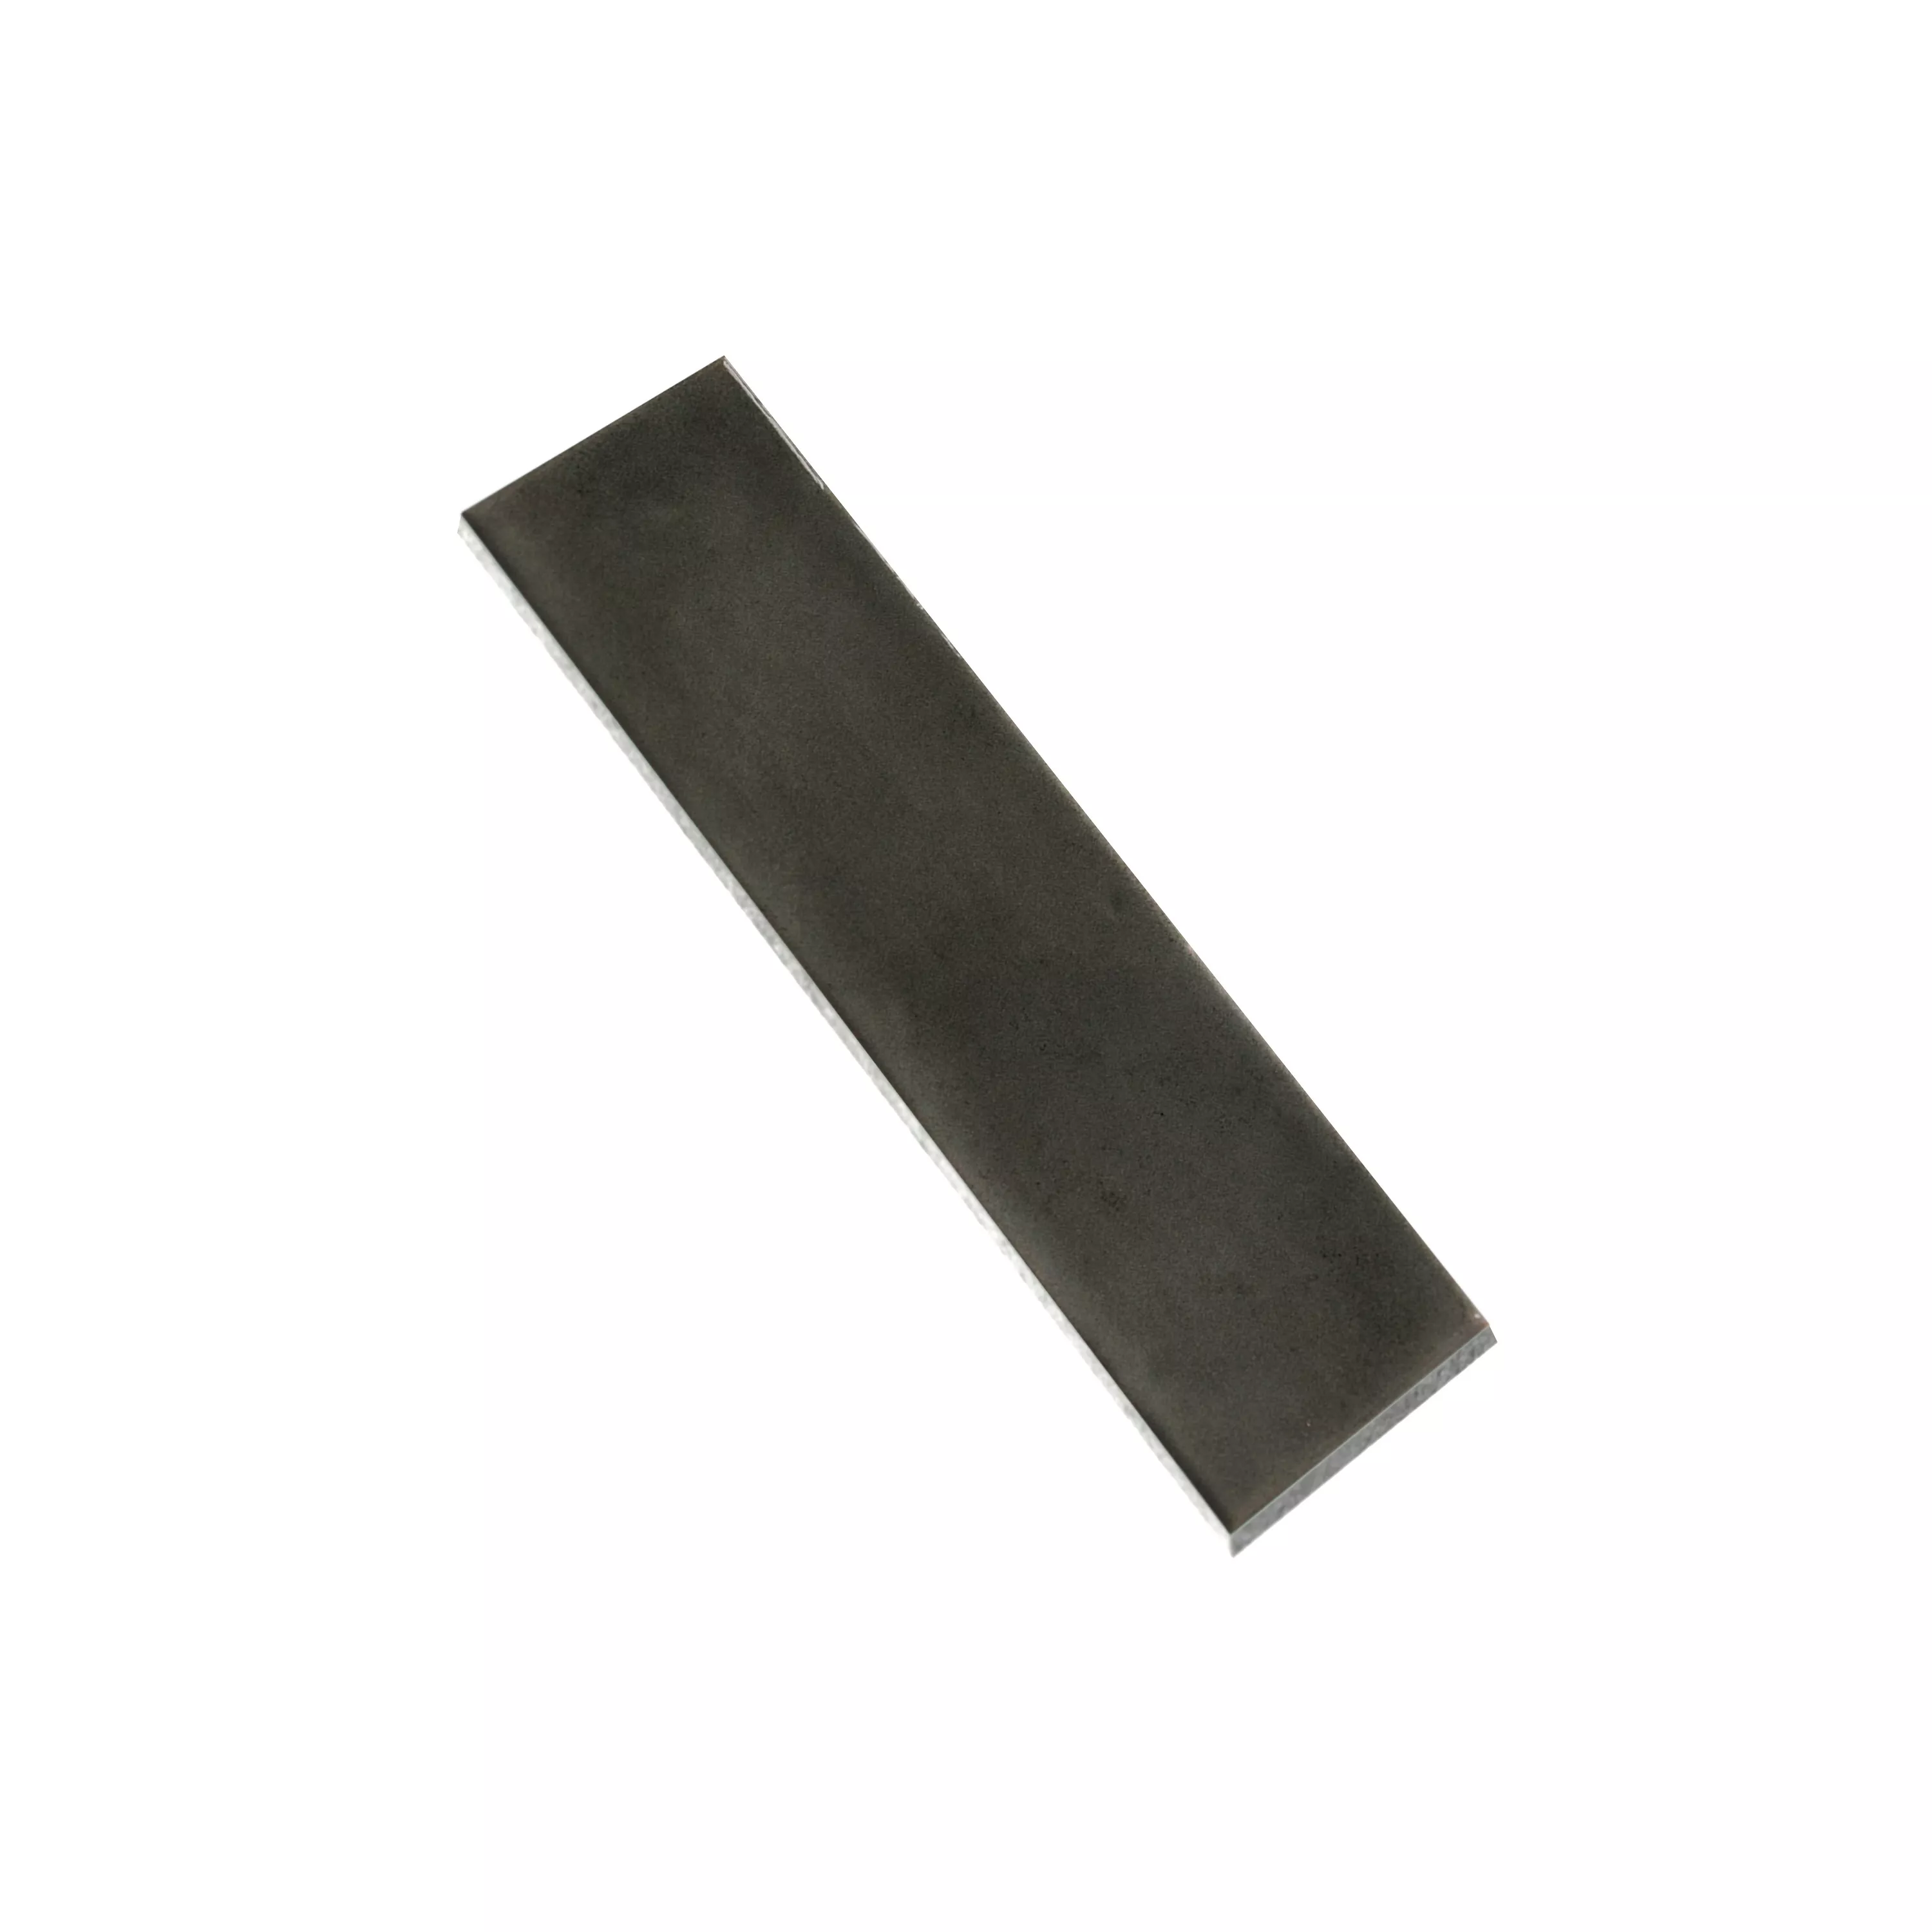 Wall Tiles Conway Waved 7,5x30cm Black